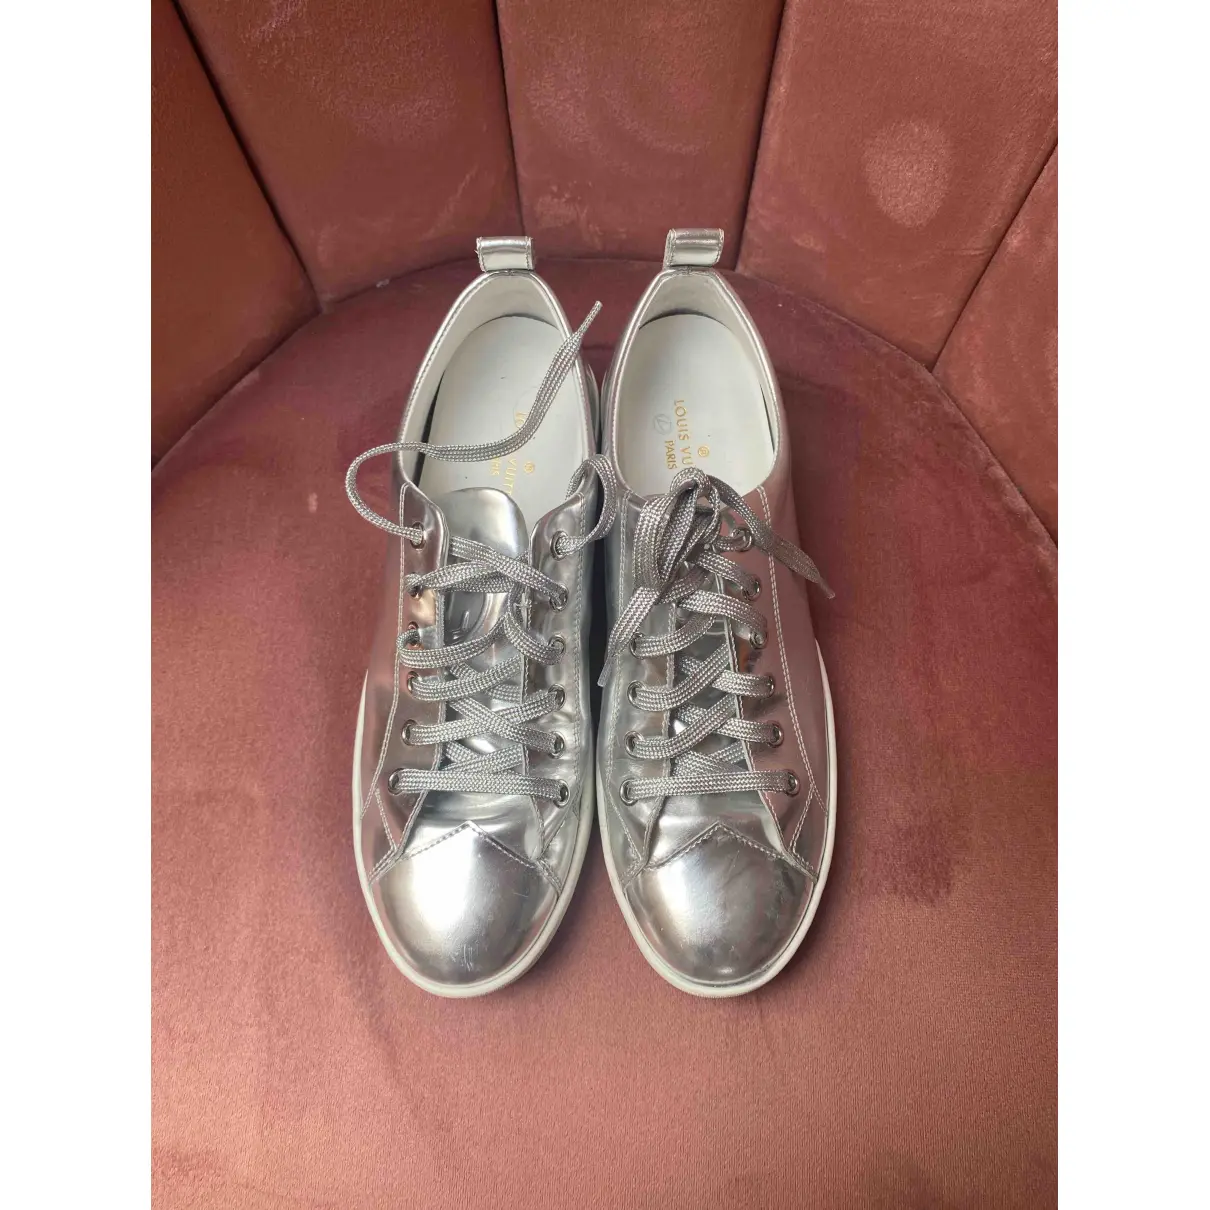 Buy Louis Vuitton Stellar patent leather trainers online